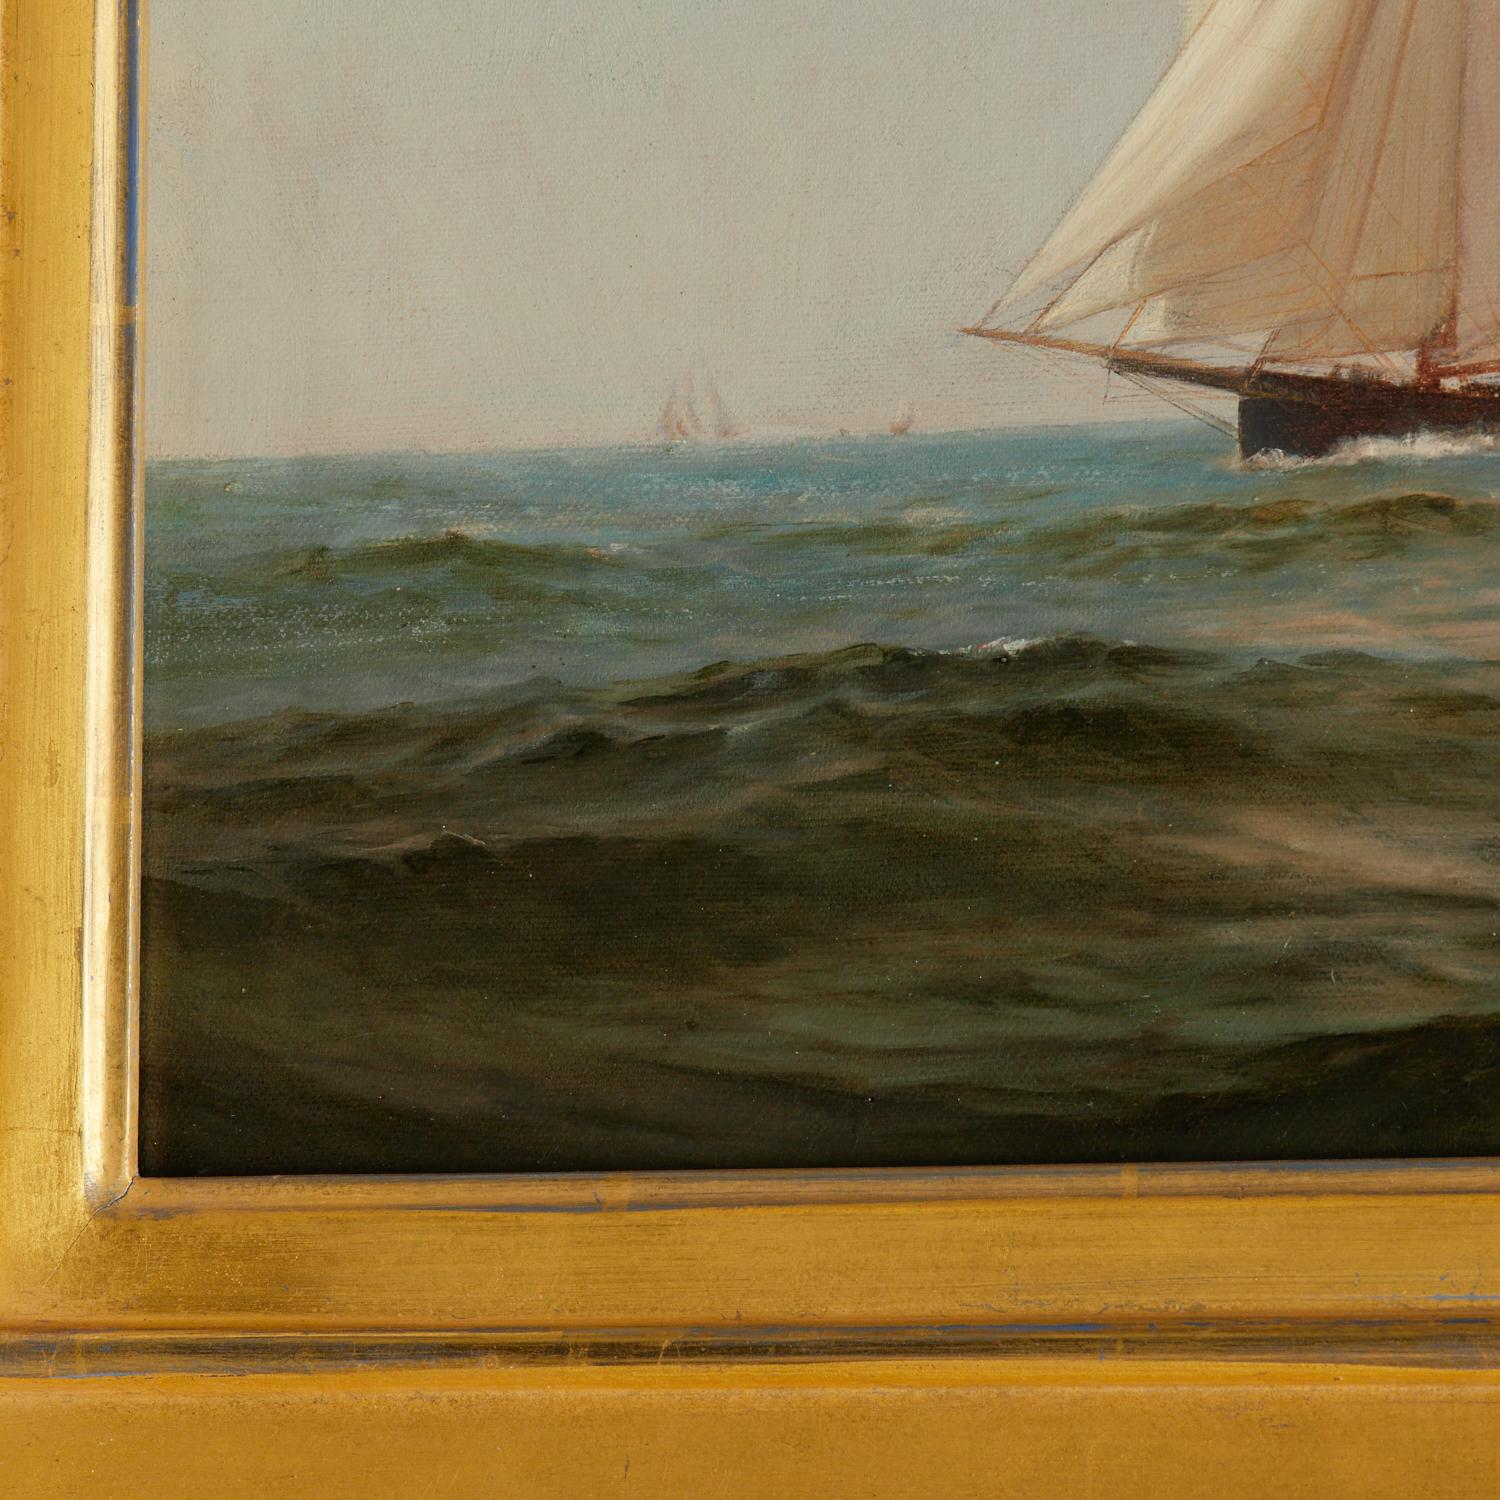 Antique Signed Oil on Canvas Warren W. Sheppard, Likely an America's Cup Race  In Good Condition For Sale In Morristown, NJ